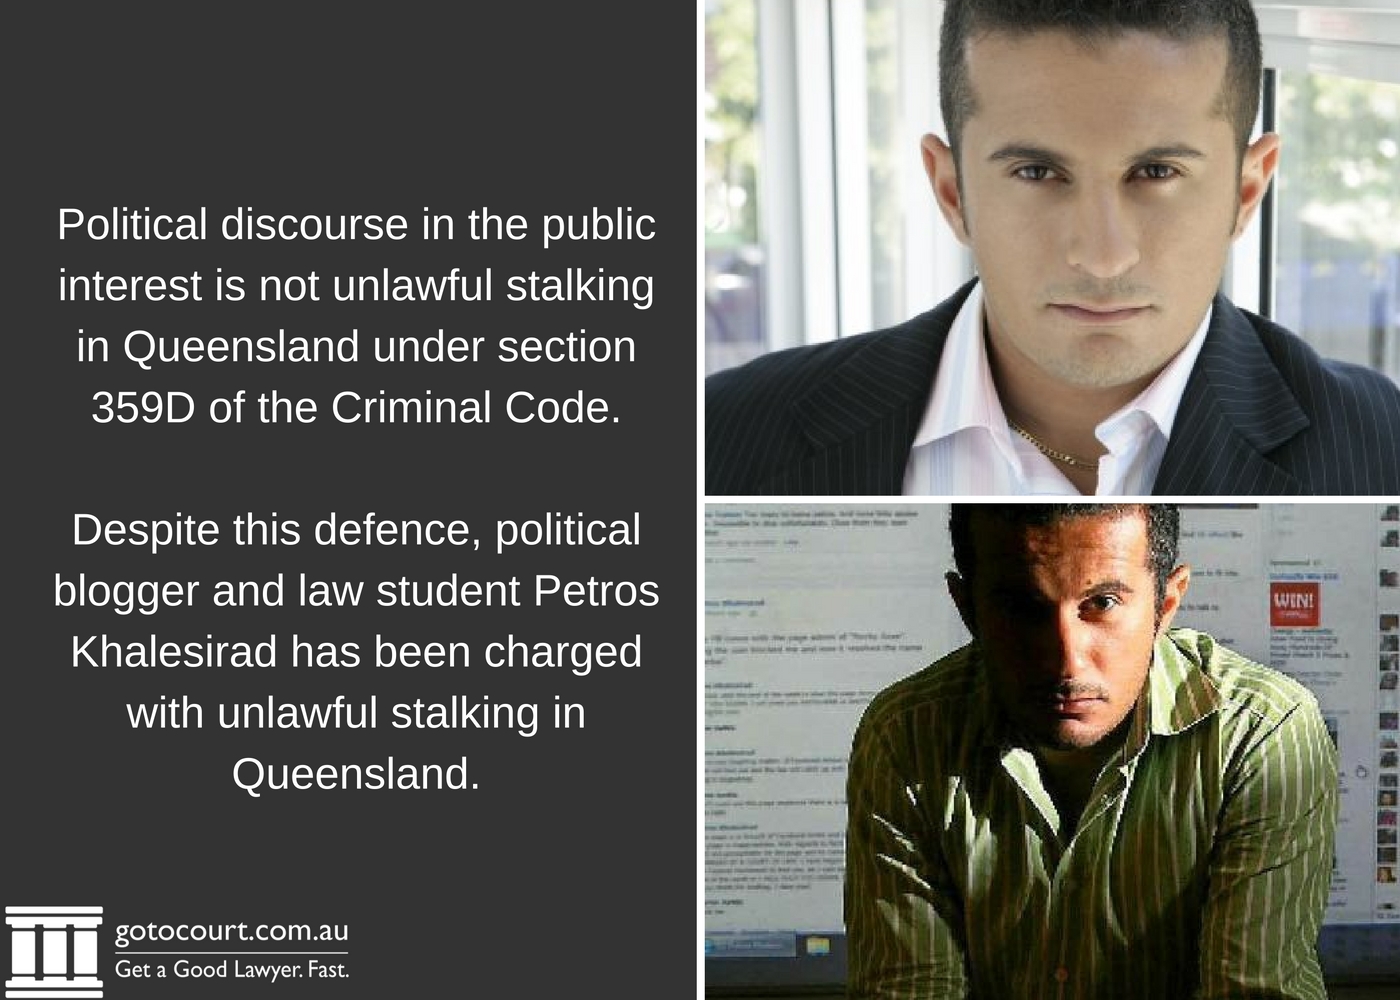 Political discourse in the public interest is not unlawful stalking in QLD under section 359D of the Criminal Code. Despite this defence, political blogger and law student Petros Khalesirad has been charged with unlawful stalking.